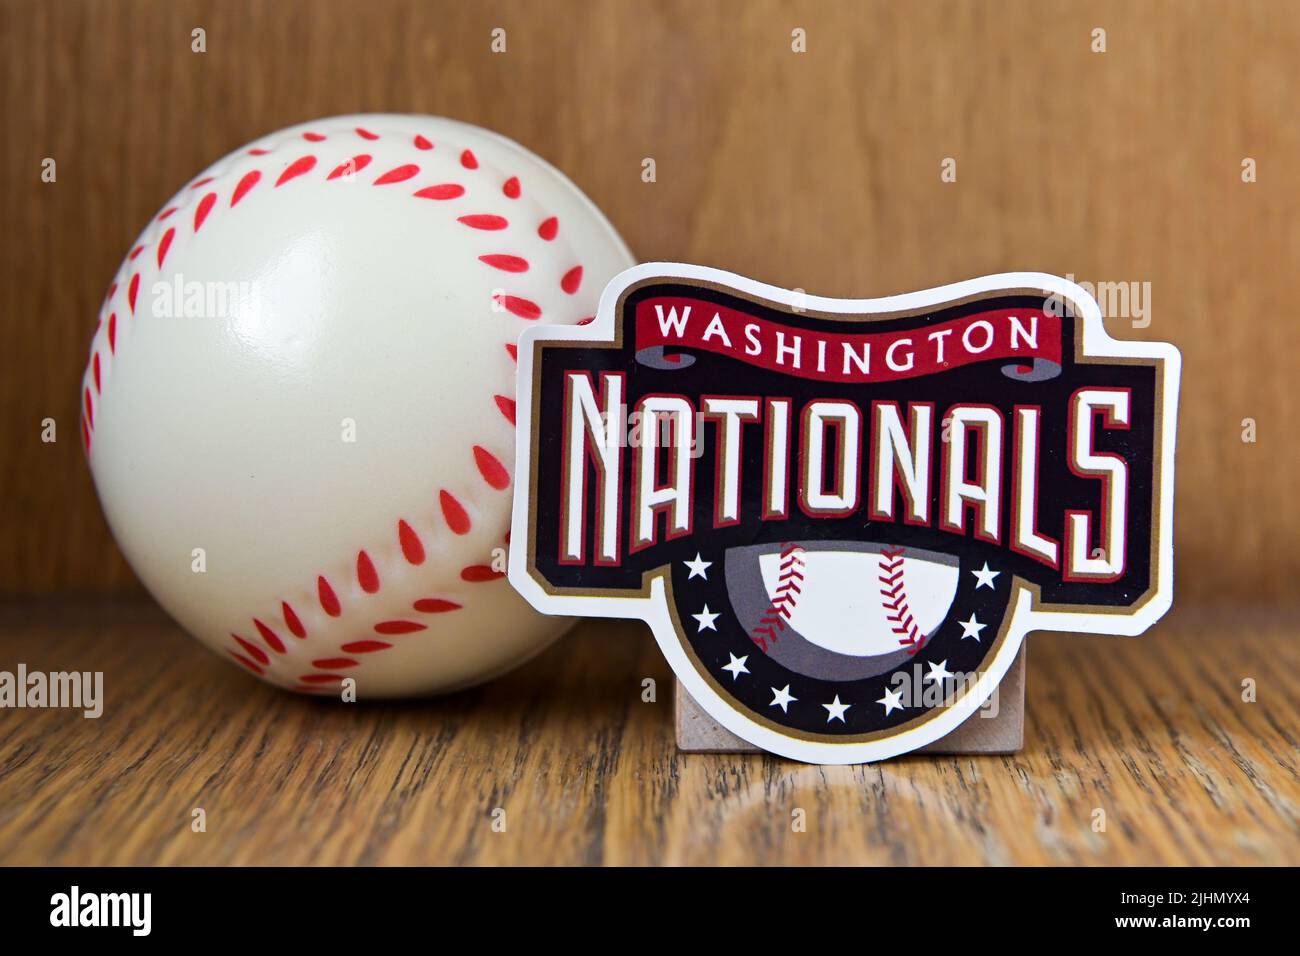 July 19, 2022, Cooperstown, New York. The emblem of the Washington Nationals baseball club and a baseball. Stock Photo